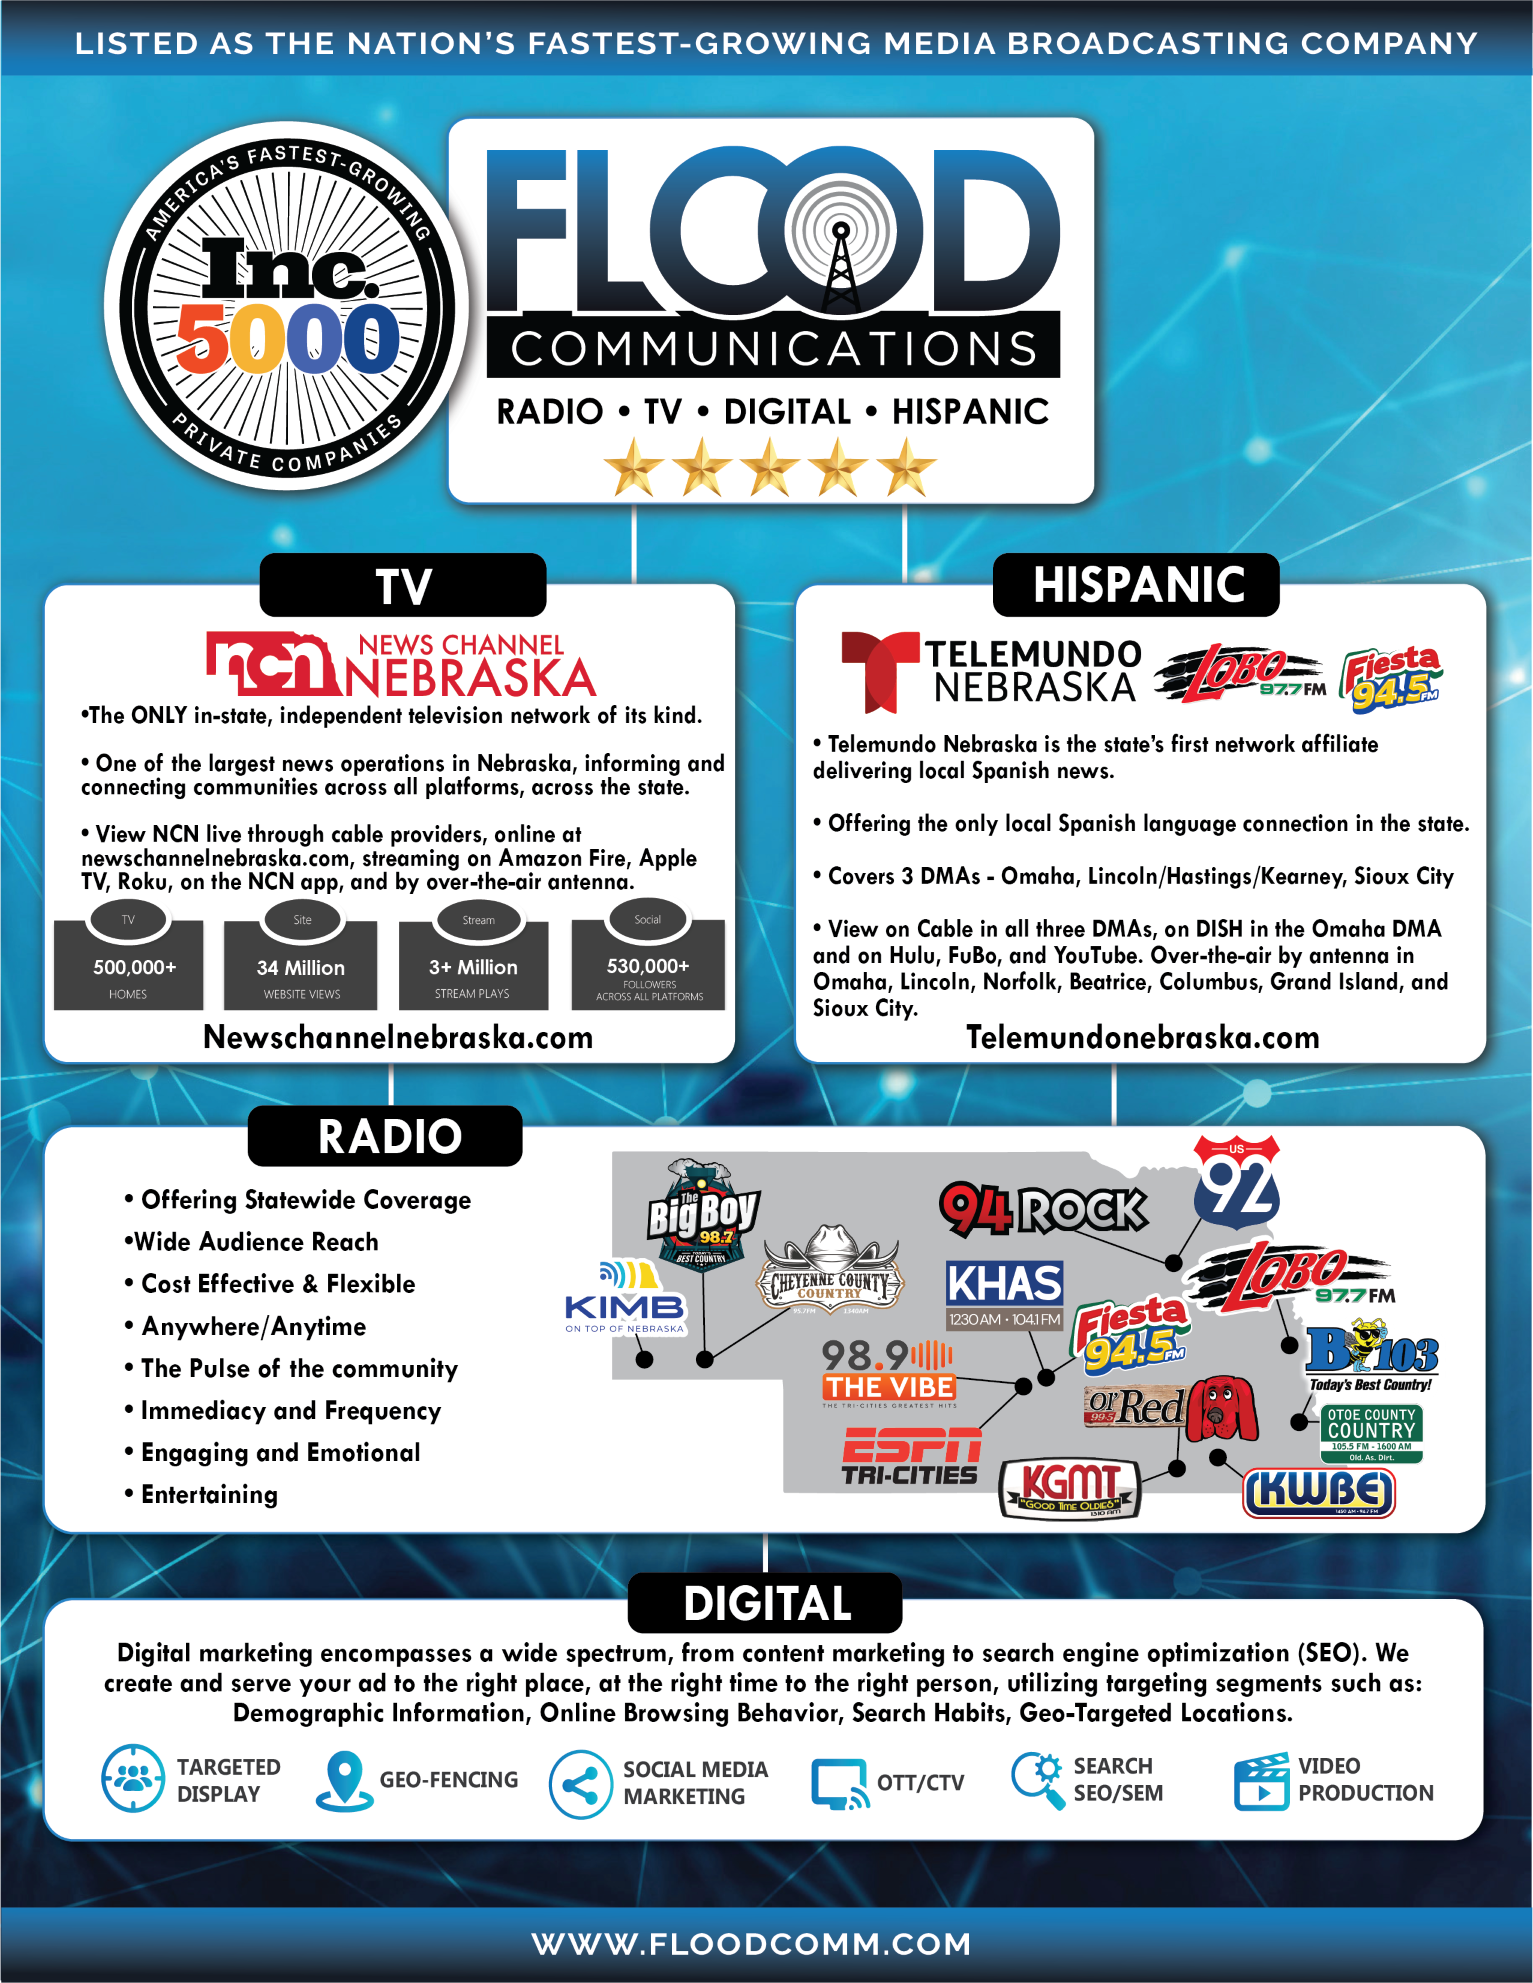 Flood Communications Overview